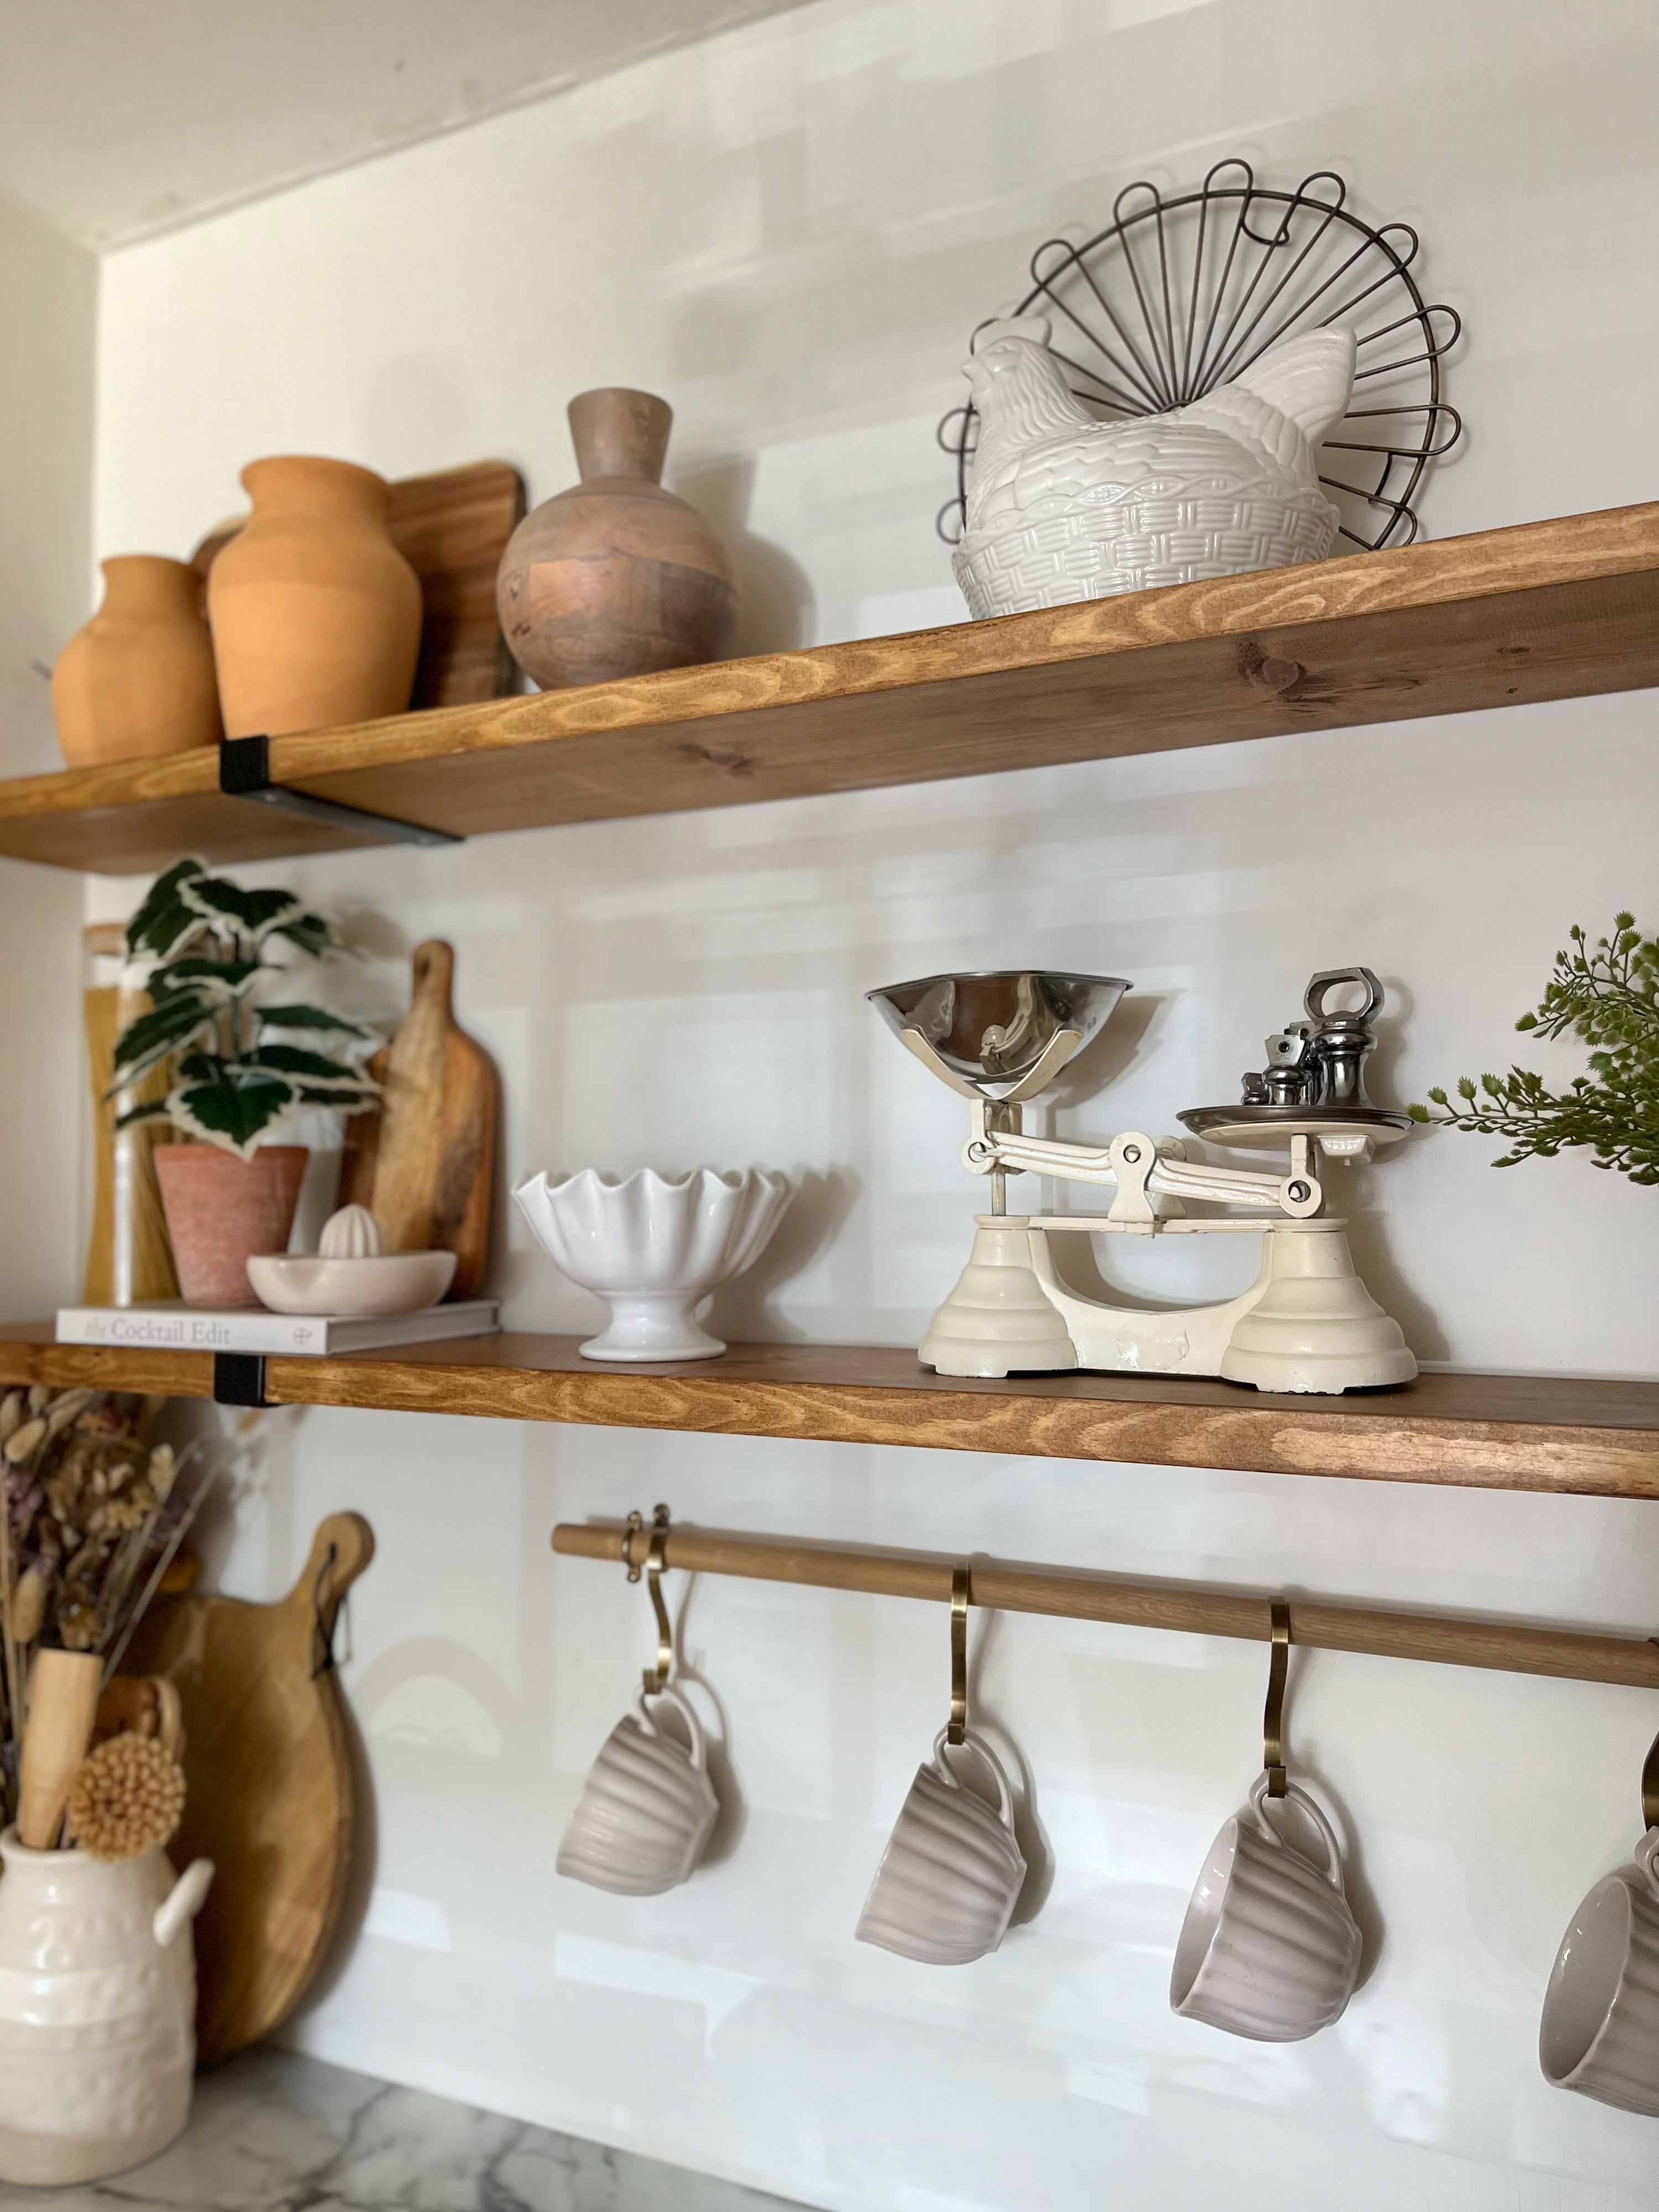 Open kitchen shelf styling. Scaffold board shelves styled in farmhouse style. Budget kitchen inspiration for your home decor